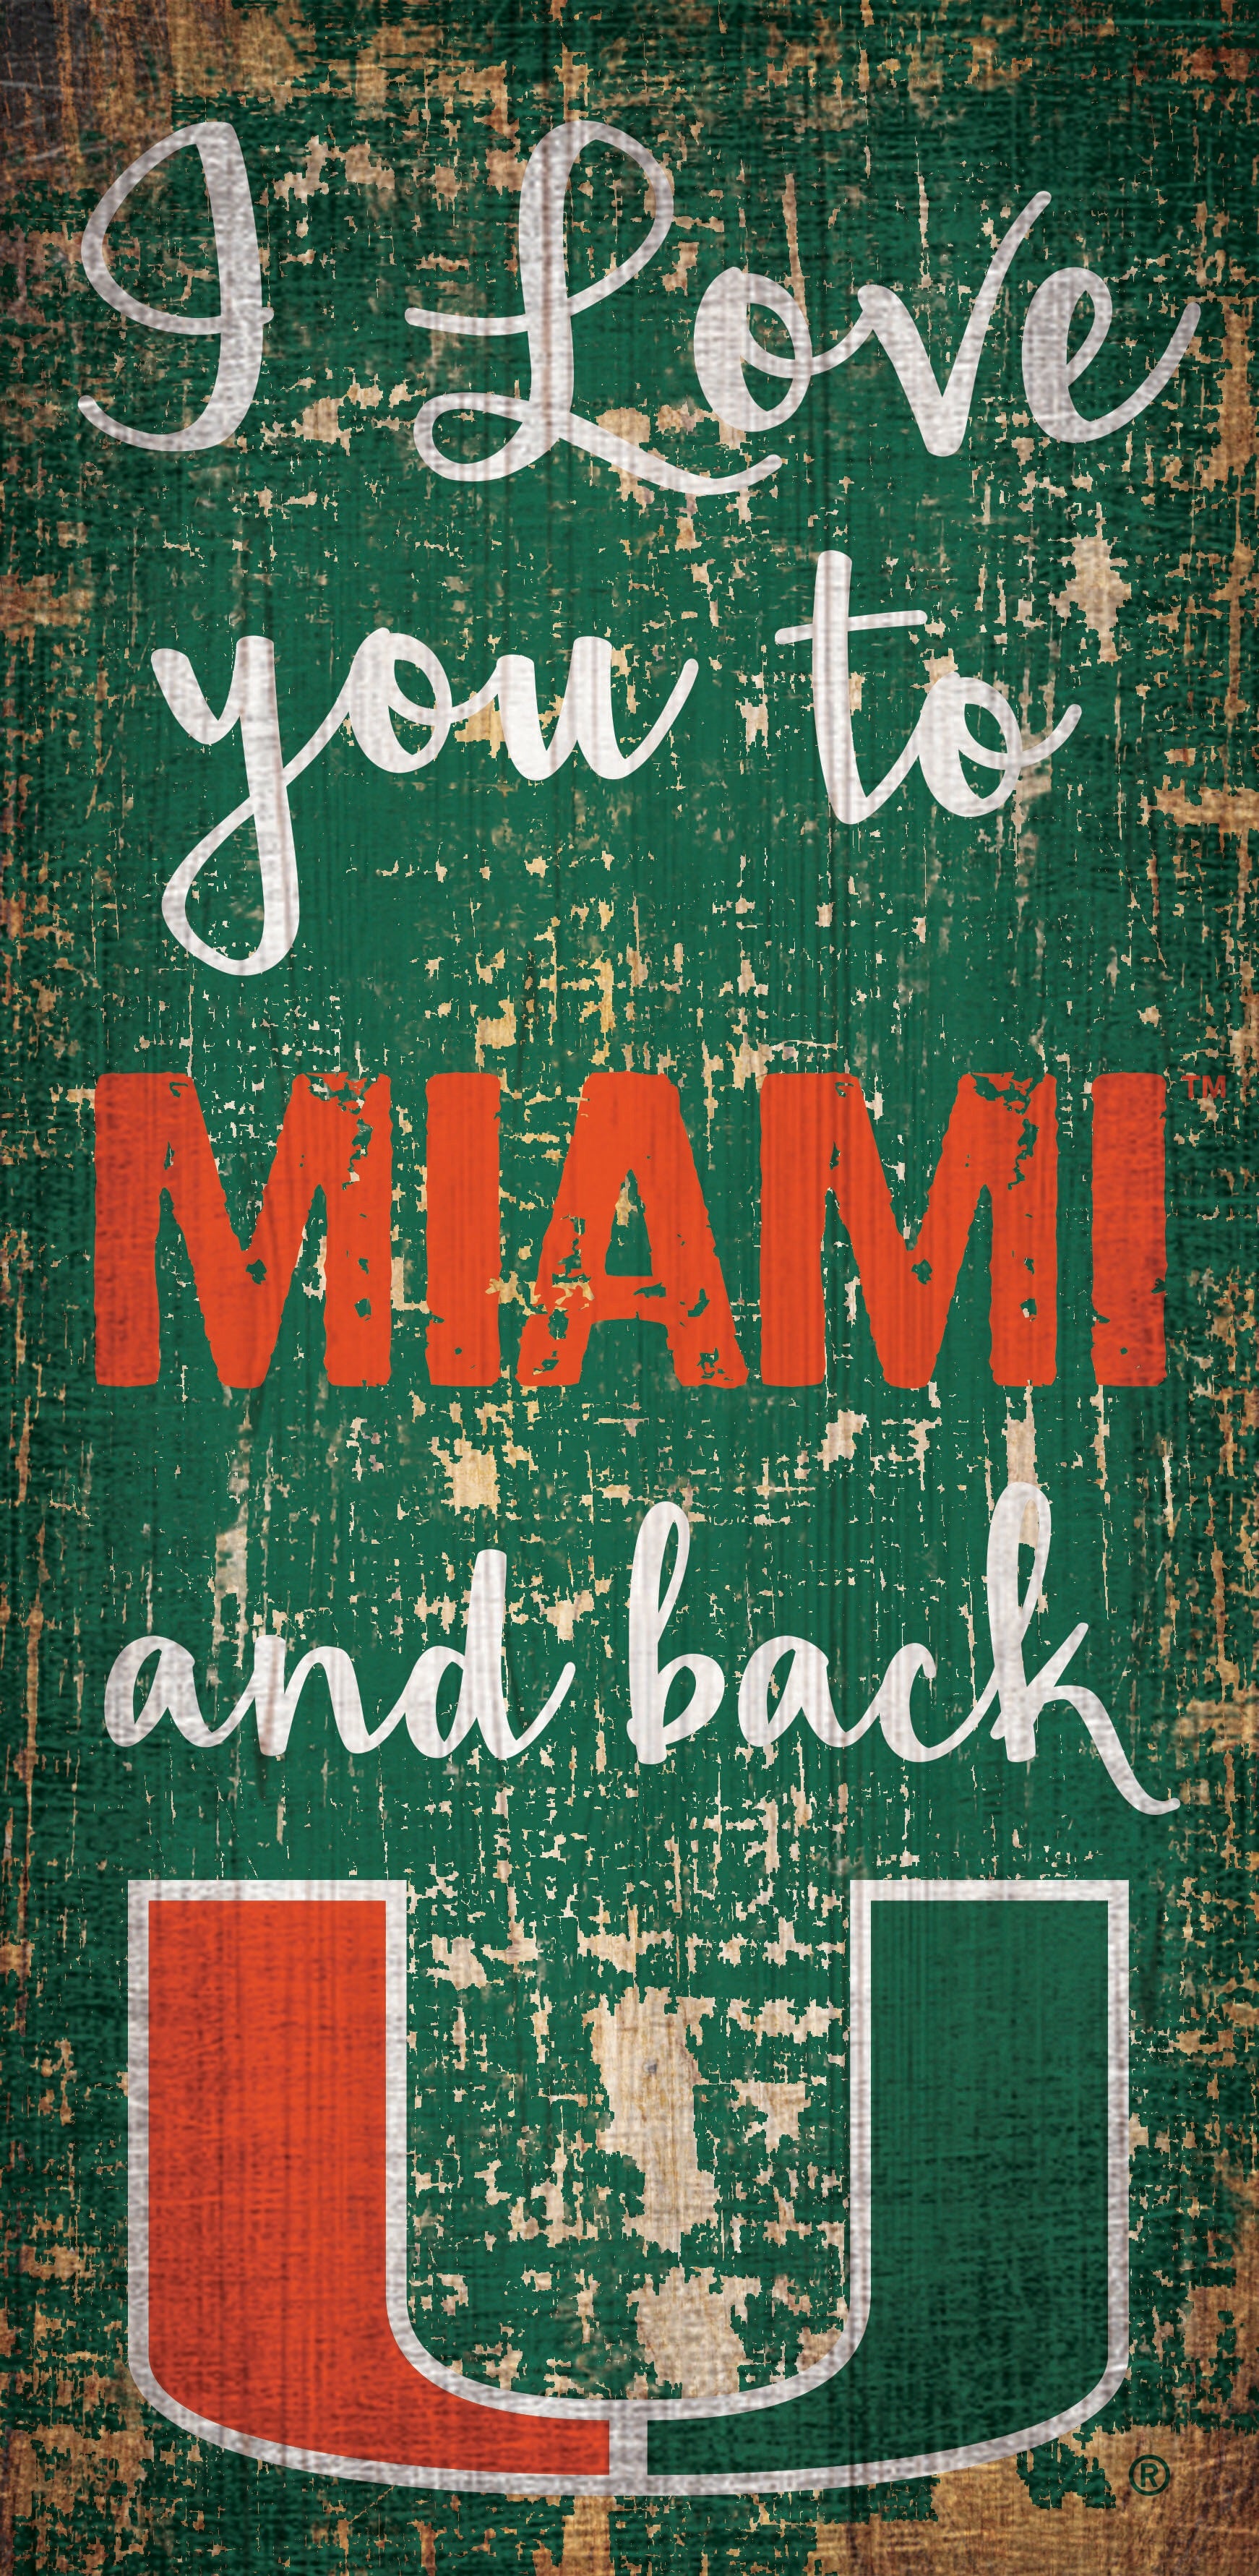 Miami Hurricanes I Love You to Miami and Back Wooden Sign - 6" x 12"